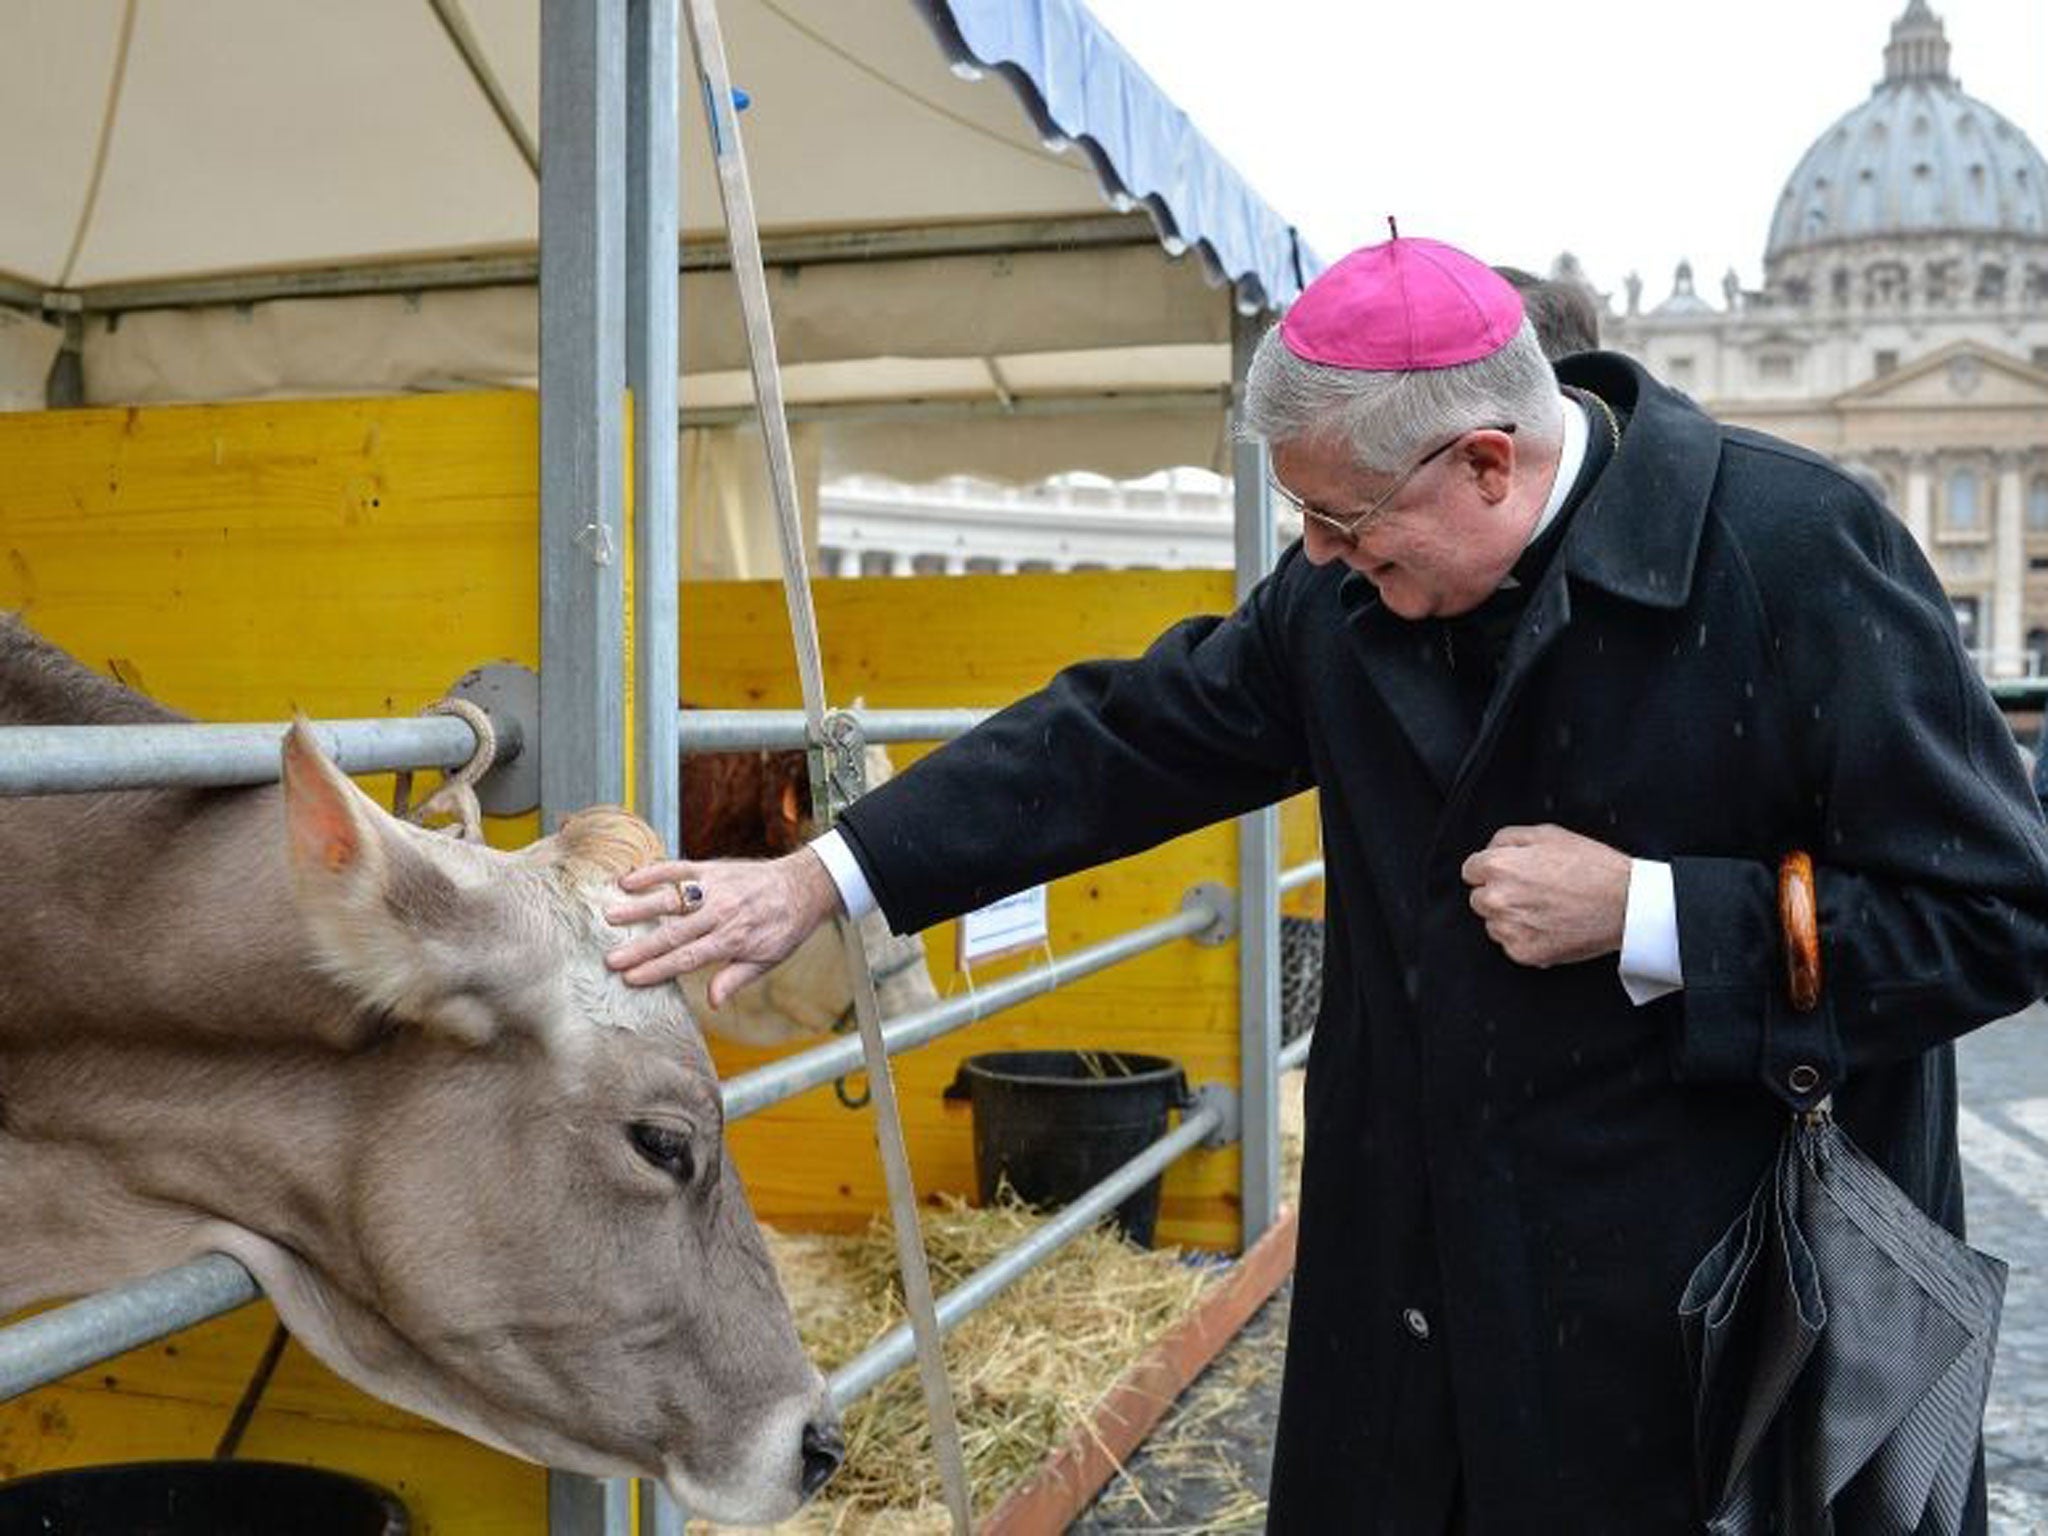 Italian bishop Guido Pozzo pets a cow in front of the Saint Peter Basilica at the Vatican, during the traditional feast day of Saint Anthony Abbot, the patron saint and protector of animals